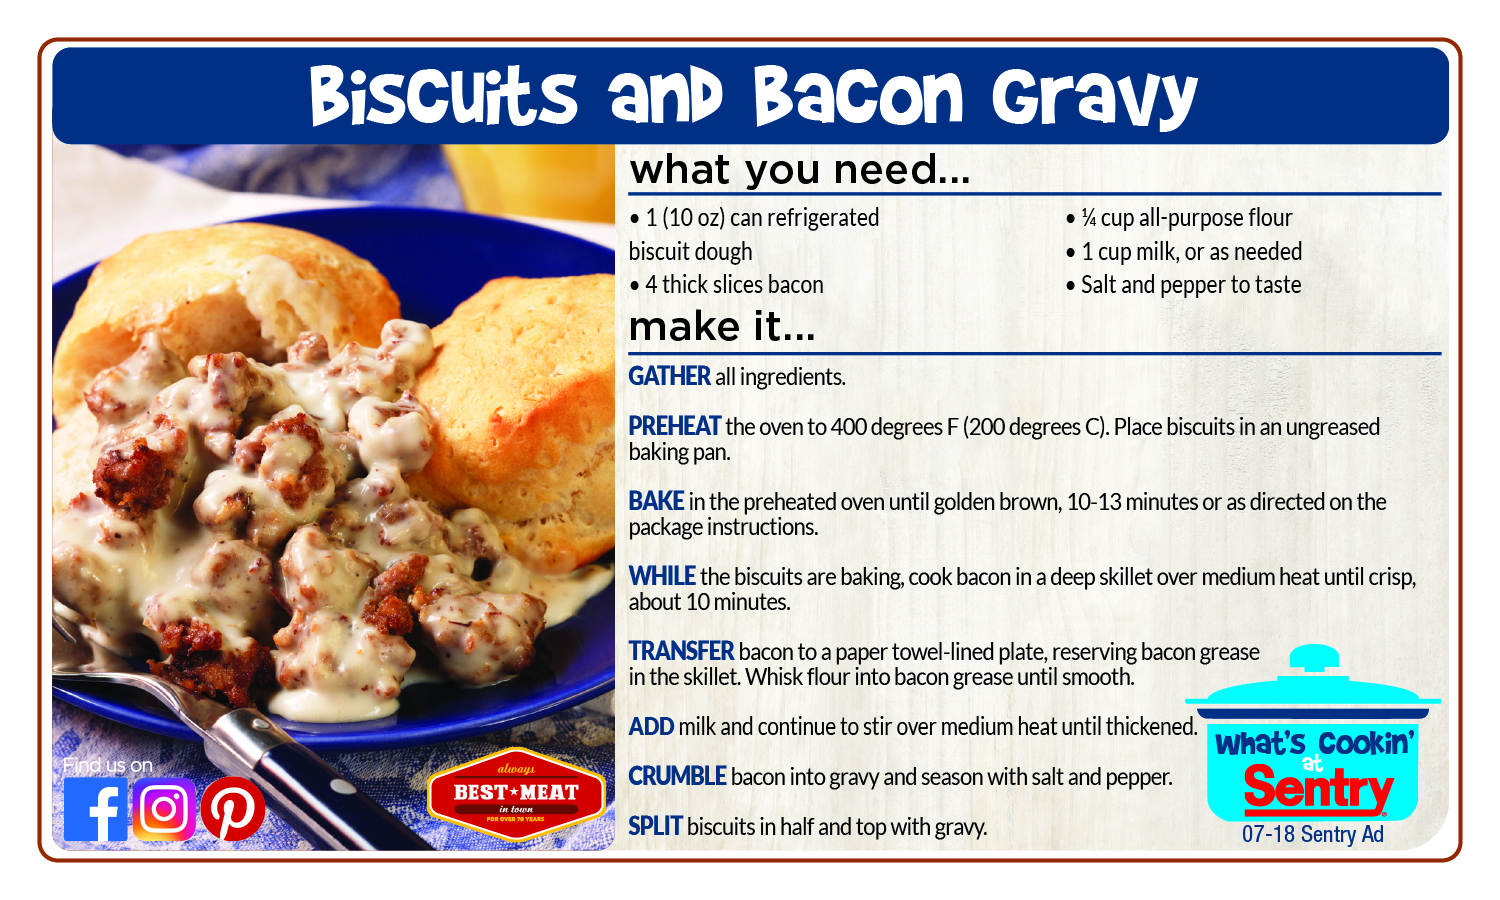 Recipe: Biscuits and Bacon Gravy